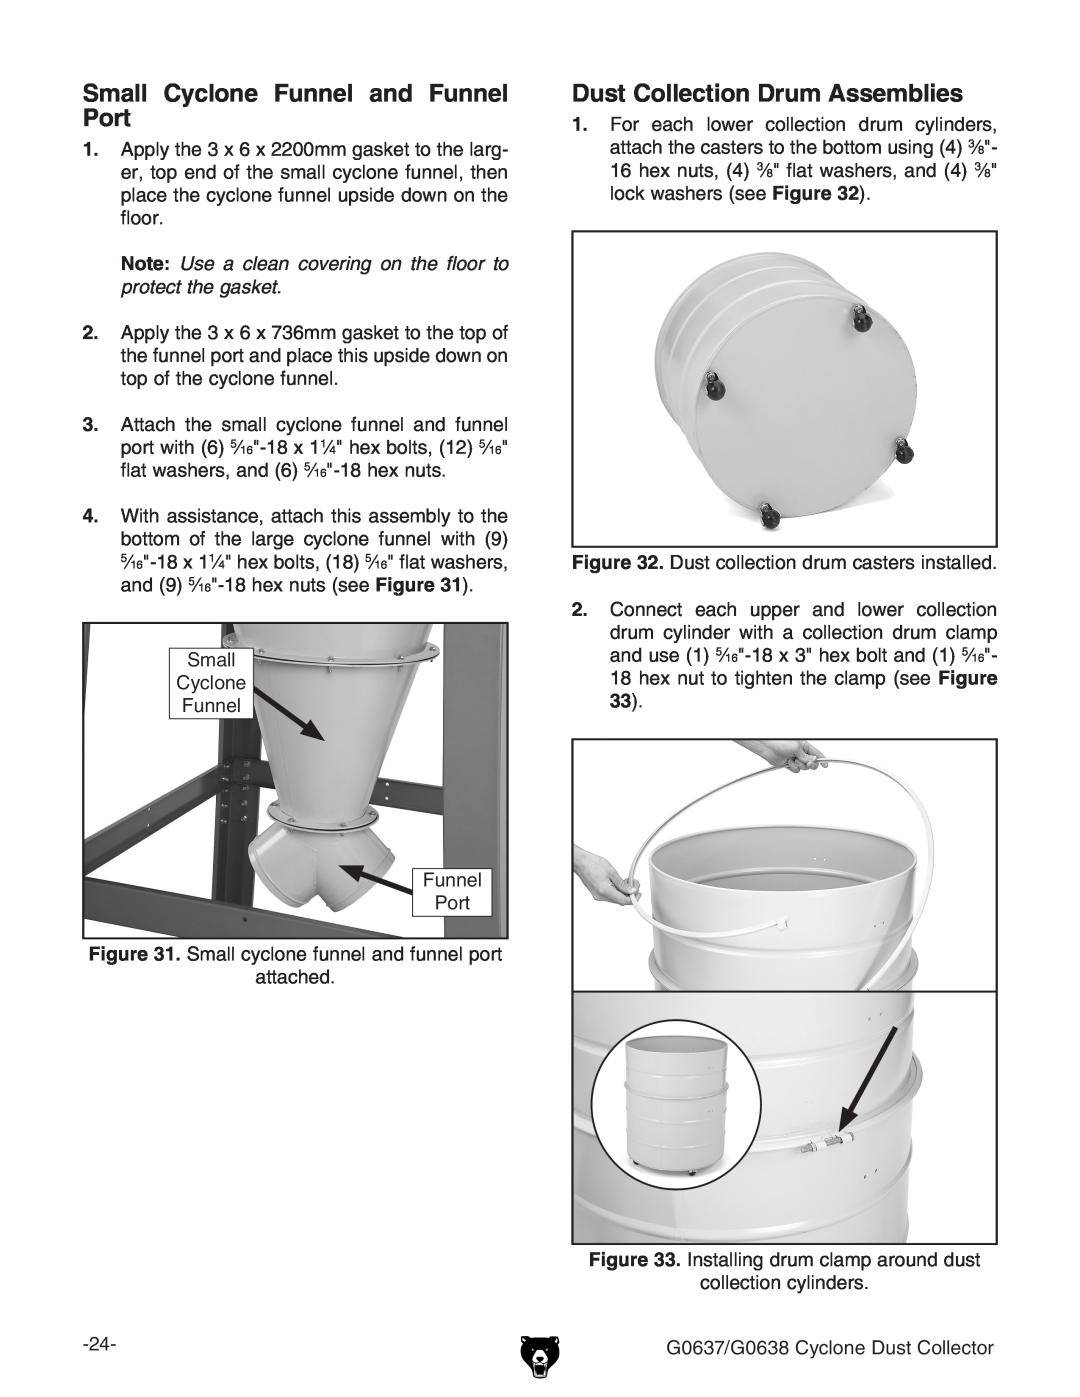 Grizzly G0637, G0638 owner manual Small Cyclone Funnel and Funnel Port, Dust Collection Drum Assemblies 